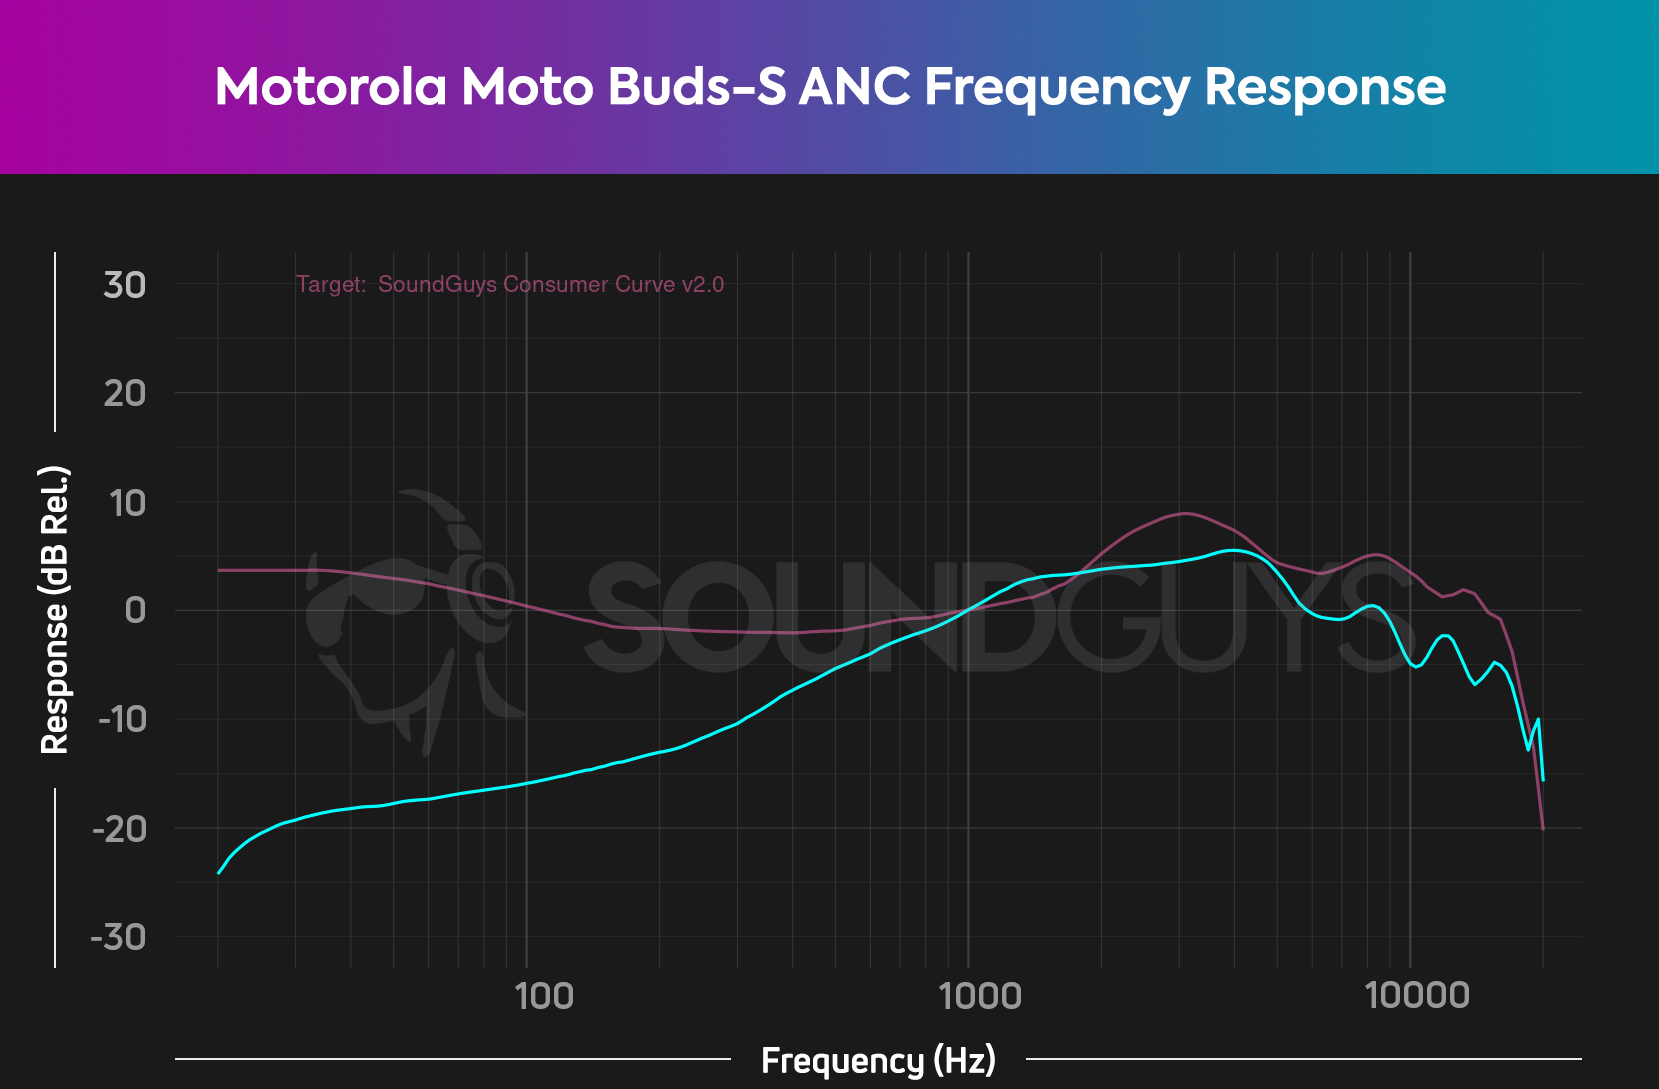 A frequency response chart for the Motorola Moto Buds-S ANC, which shows almost totally absent bass response.